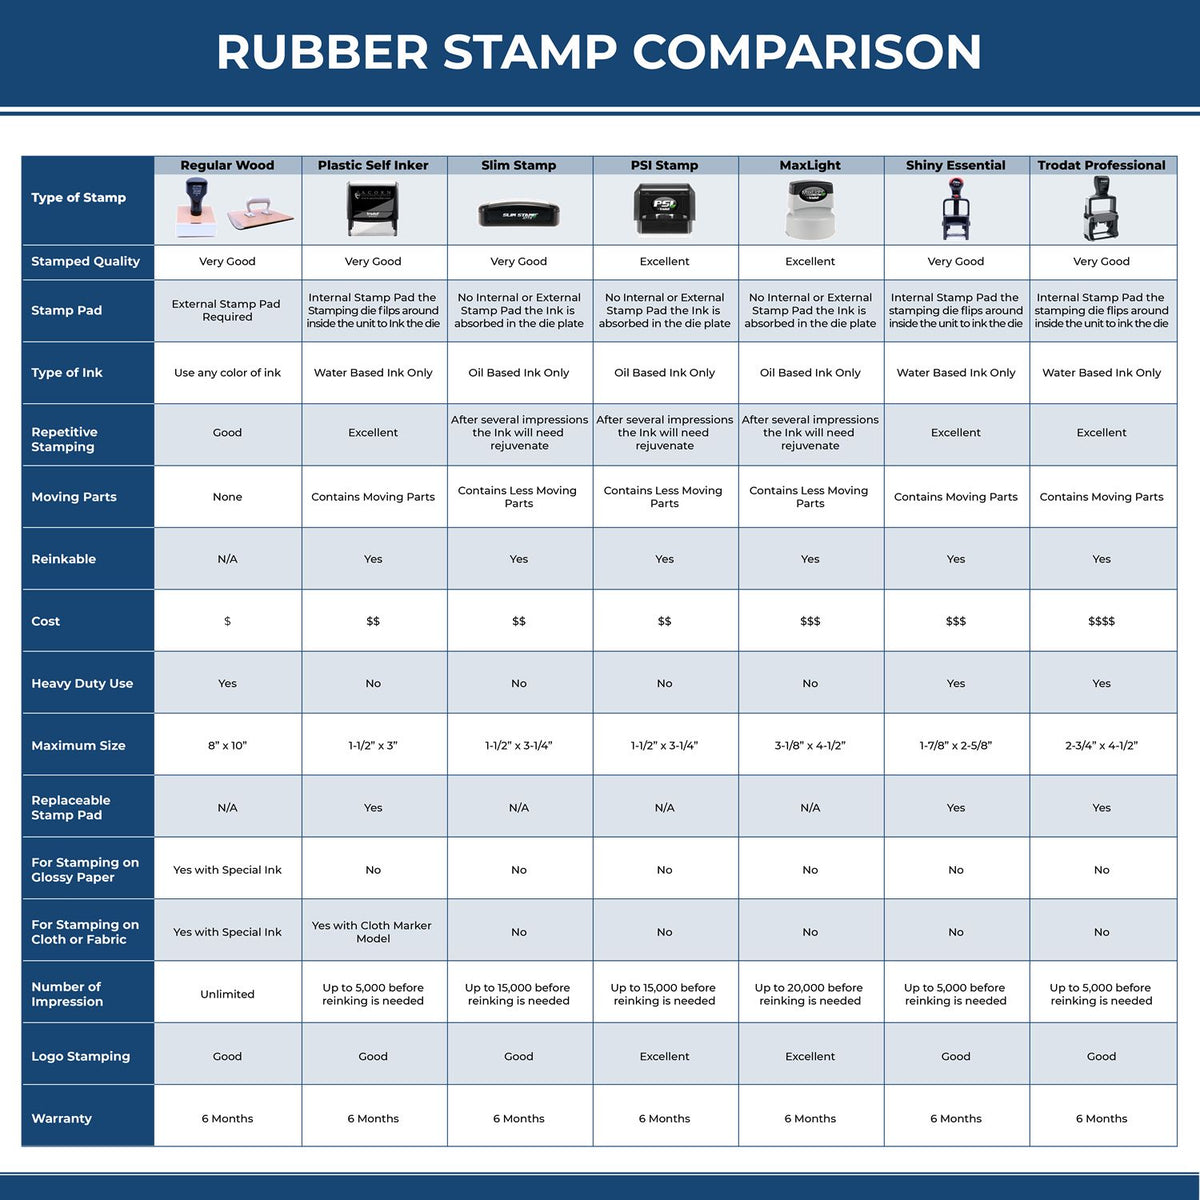 Large Rush Rubber Stamp 4154R Rubber Stamp Comparison